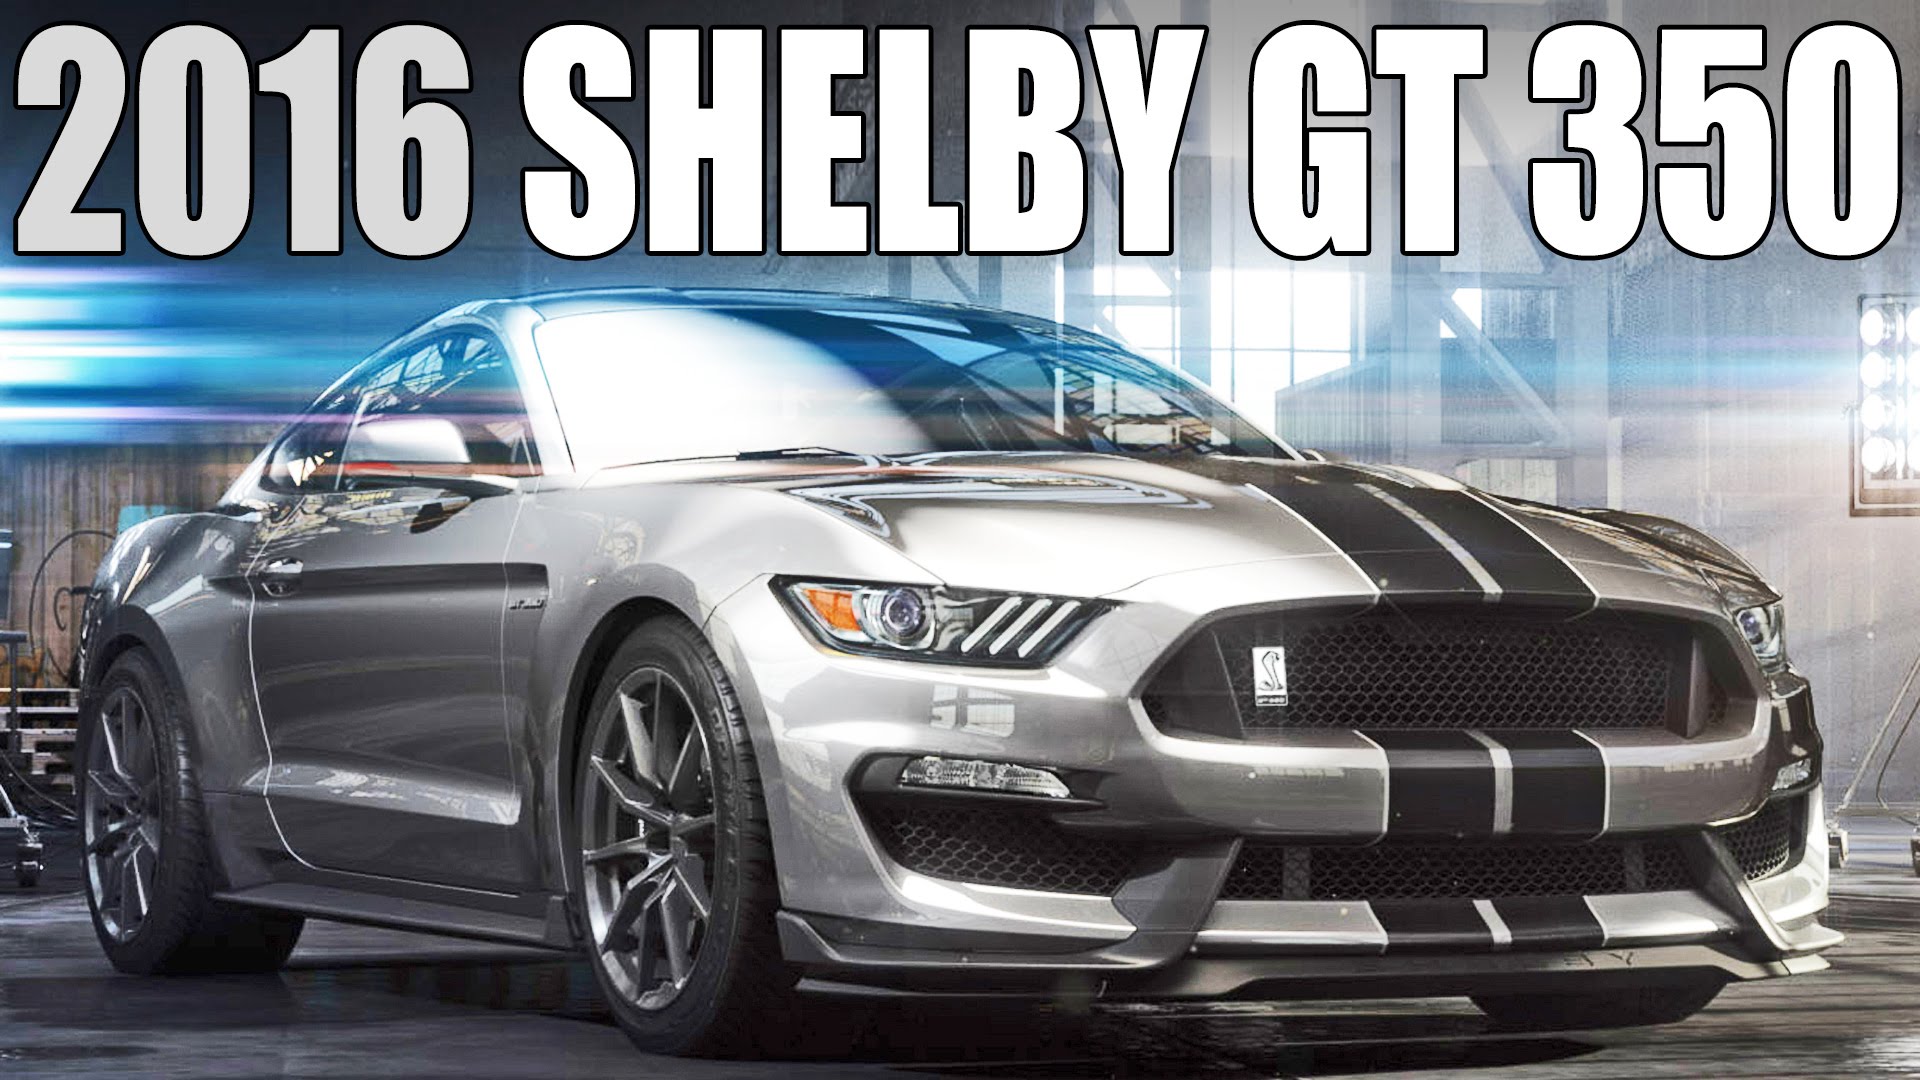 New Ford Mustang Shelby Gt350